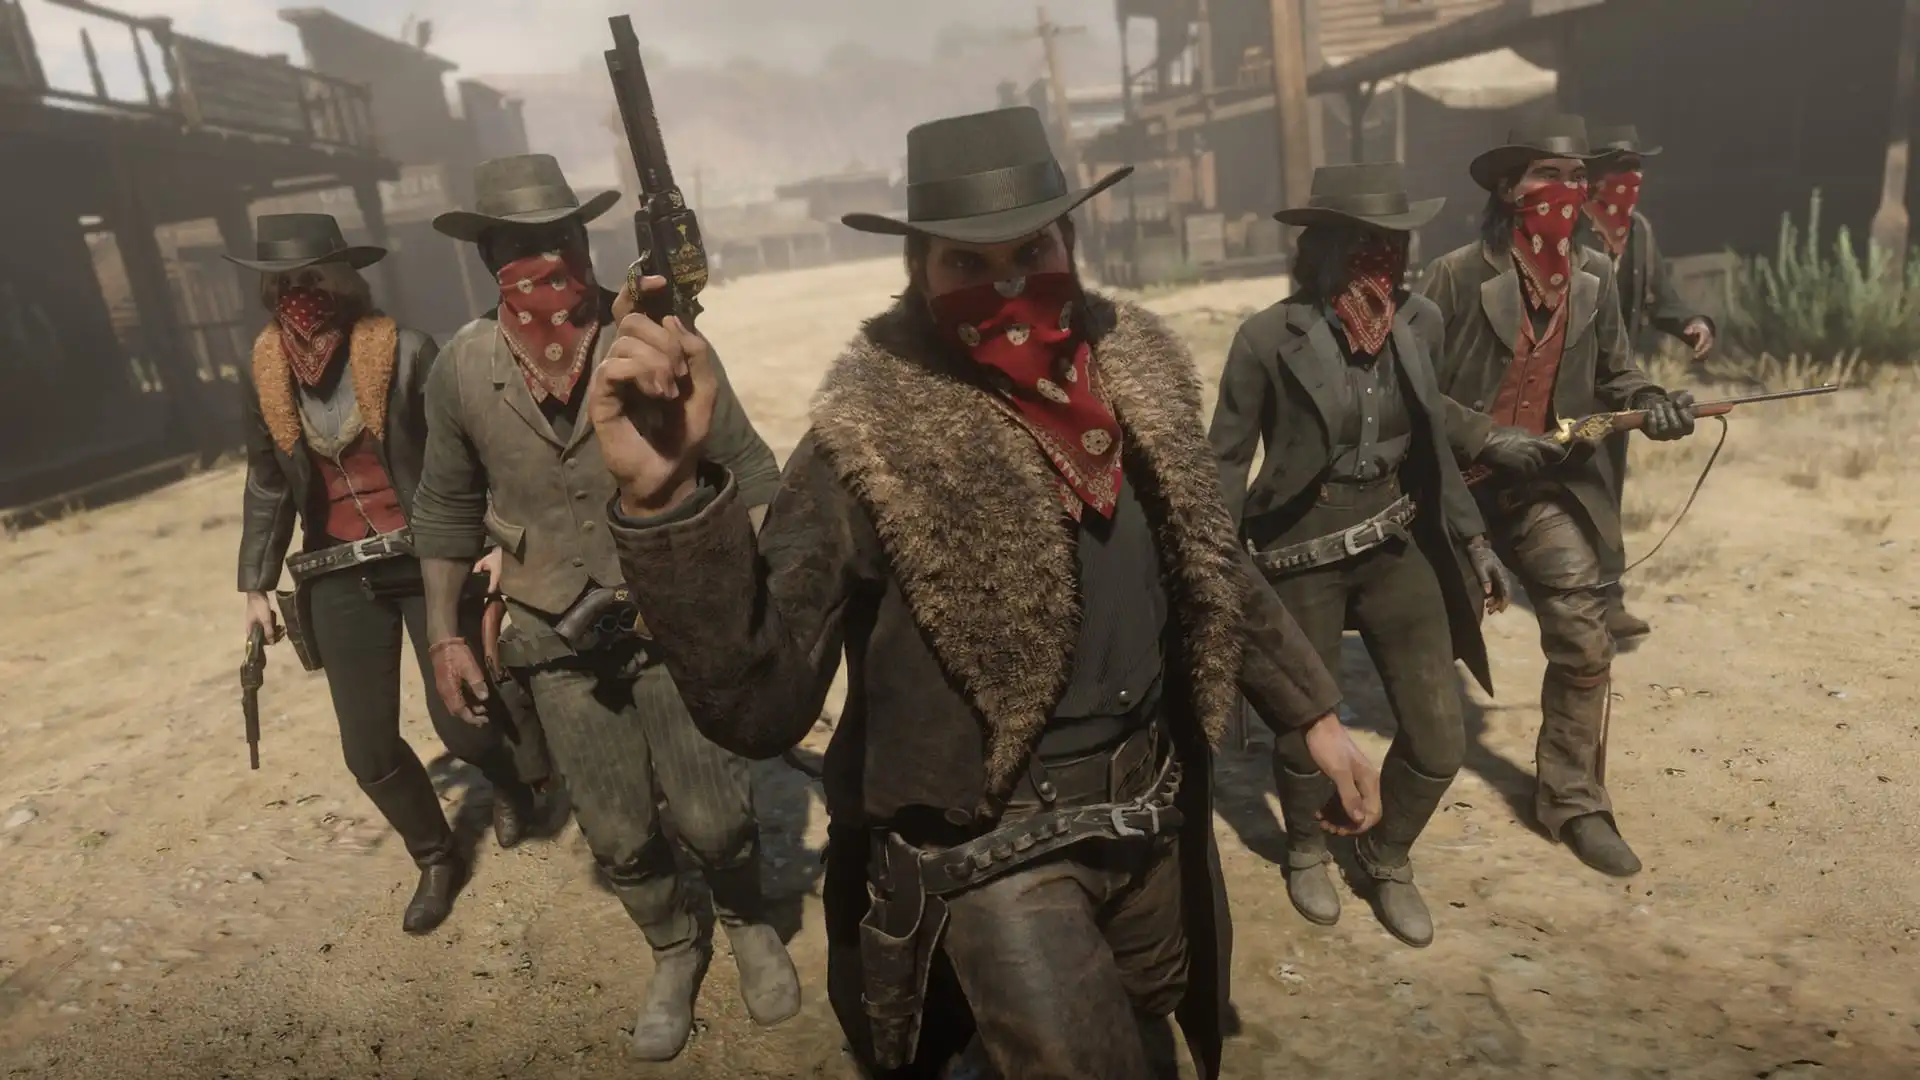 Is Red Dead Redemption 2 Coming to Steam? – GameSpew